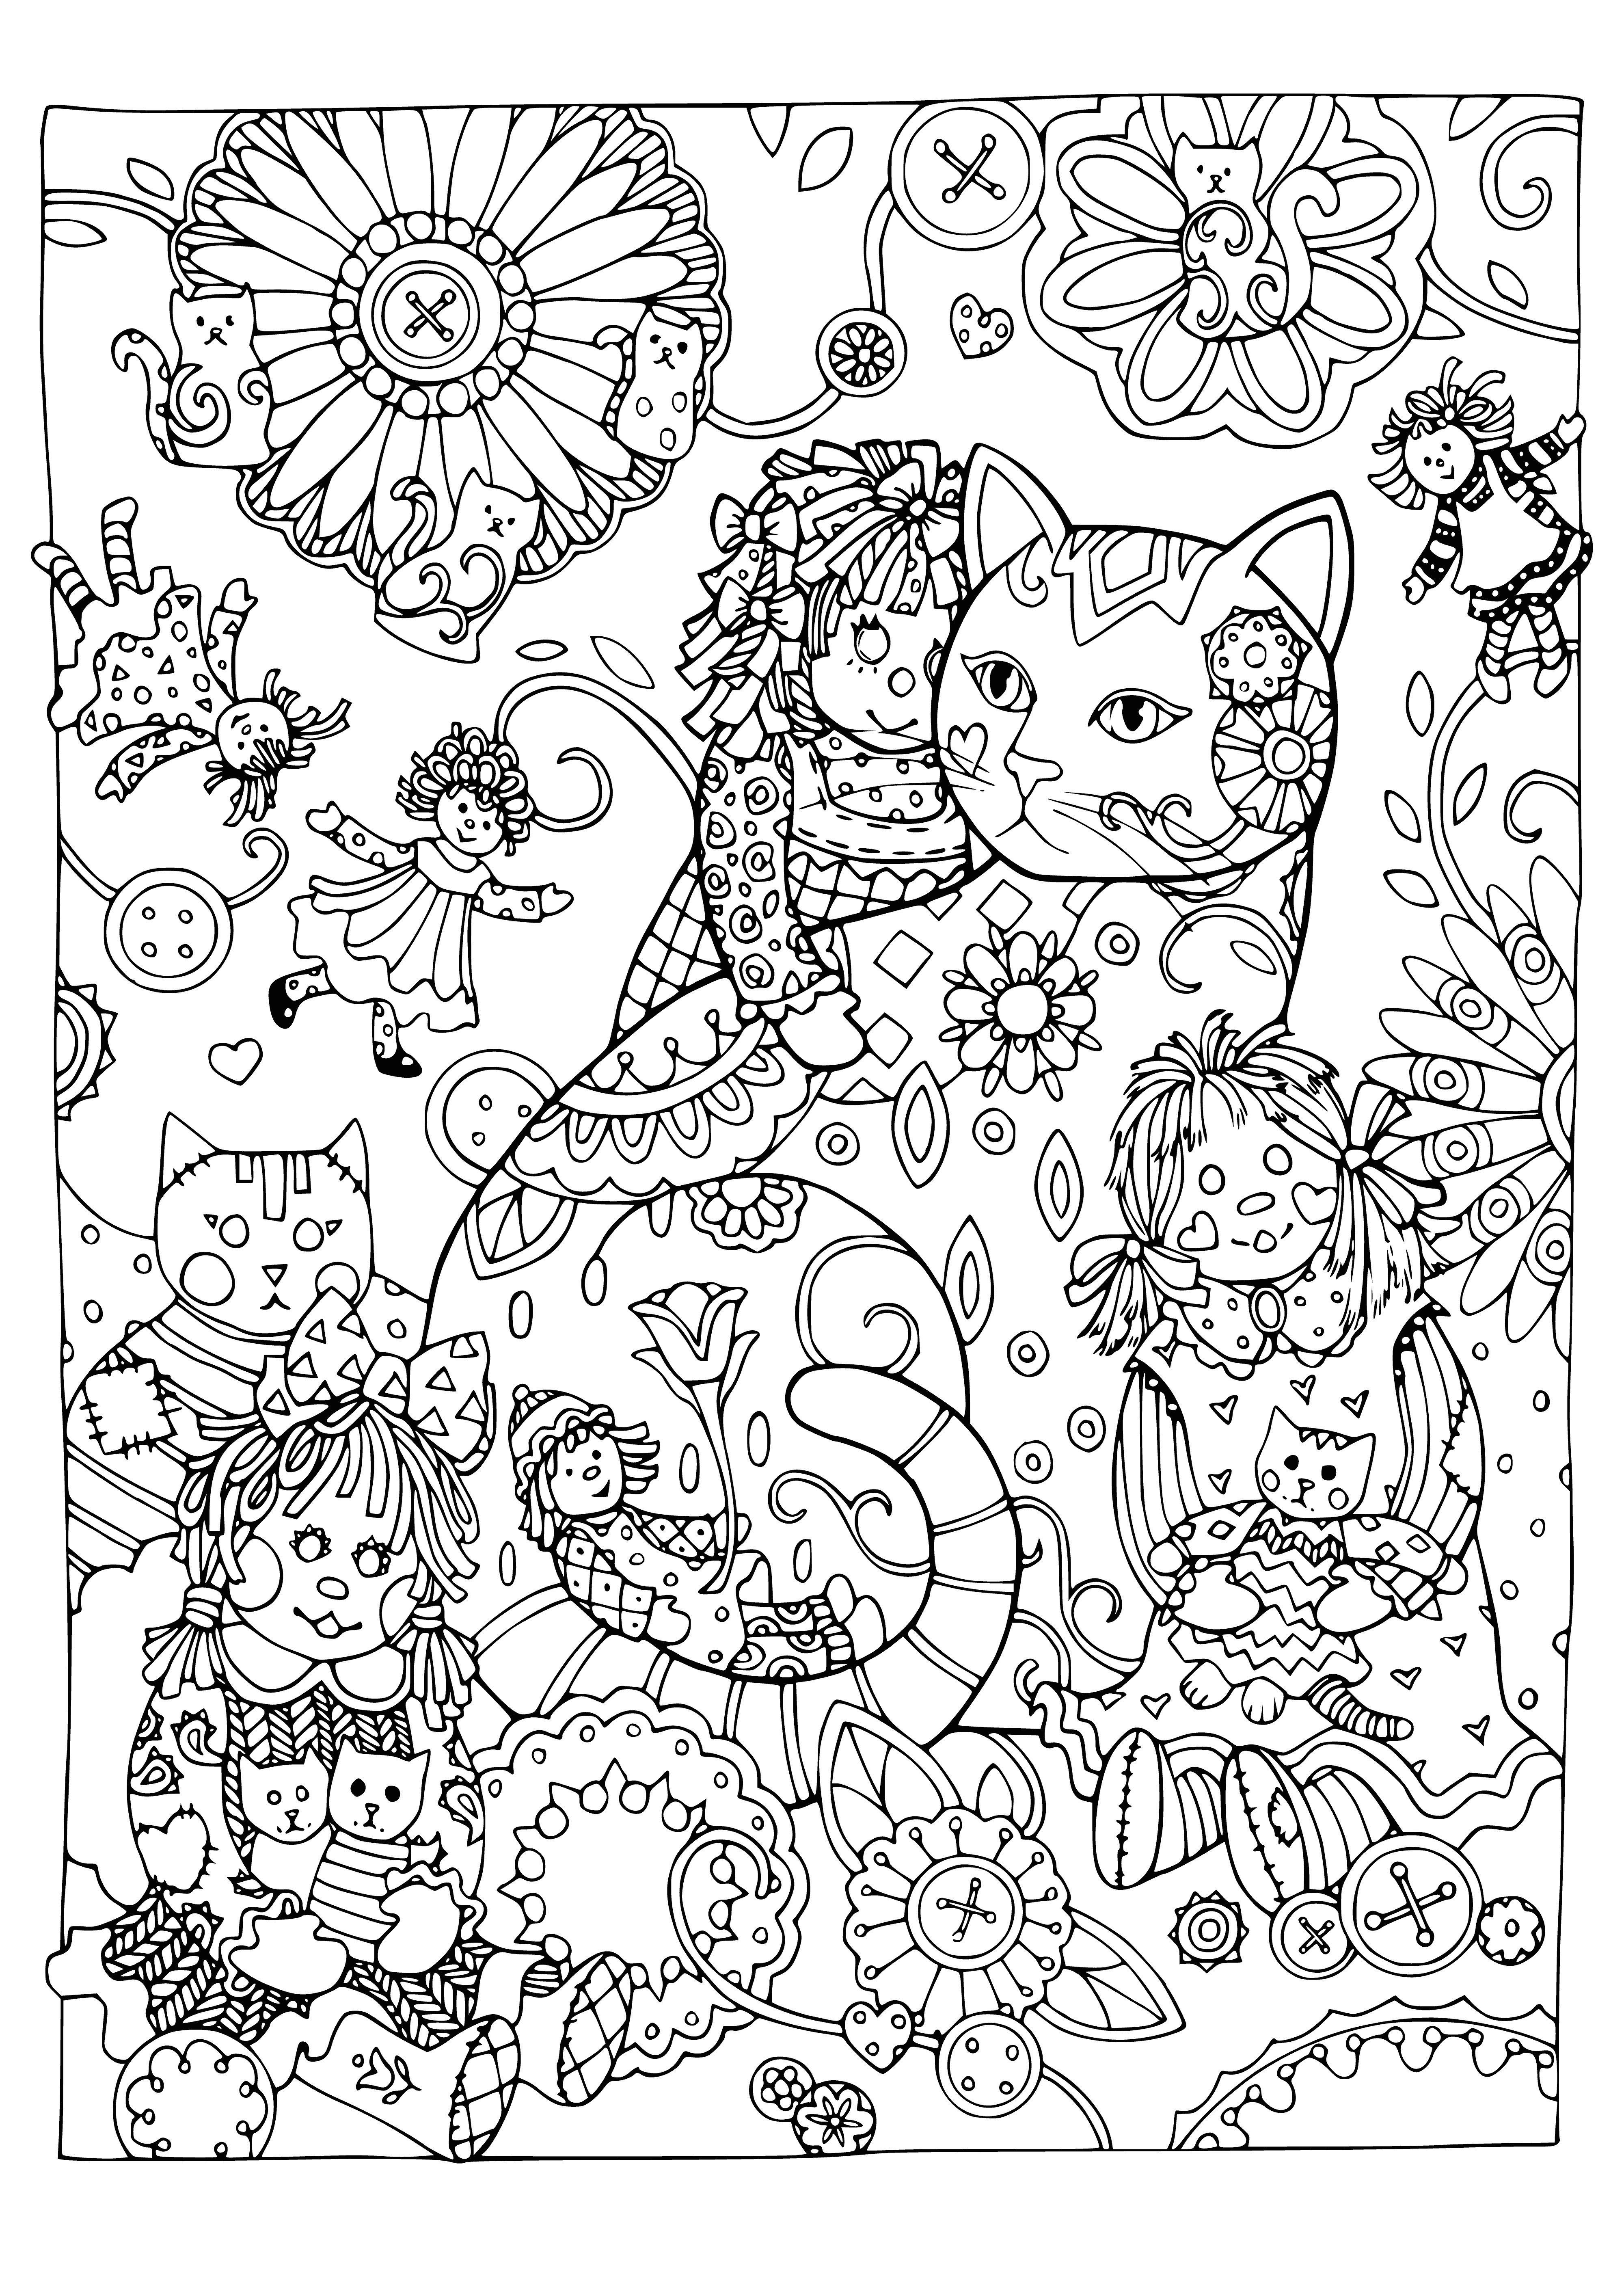 Cat and dolls coloring page